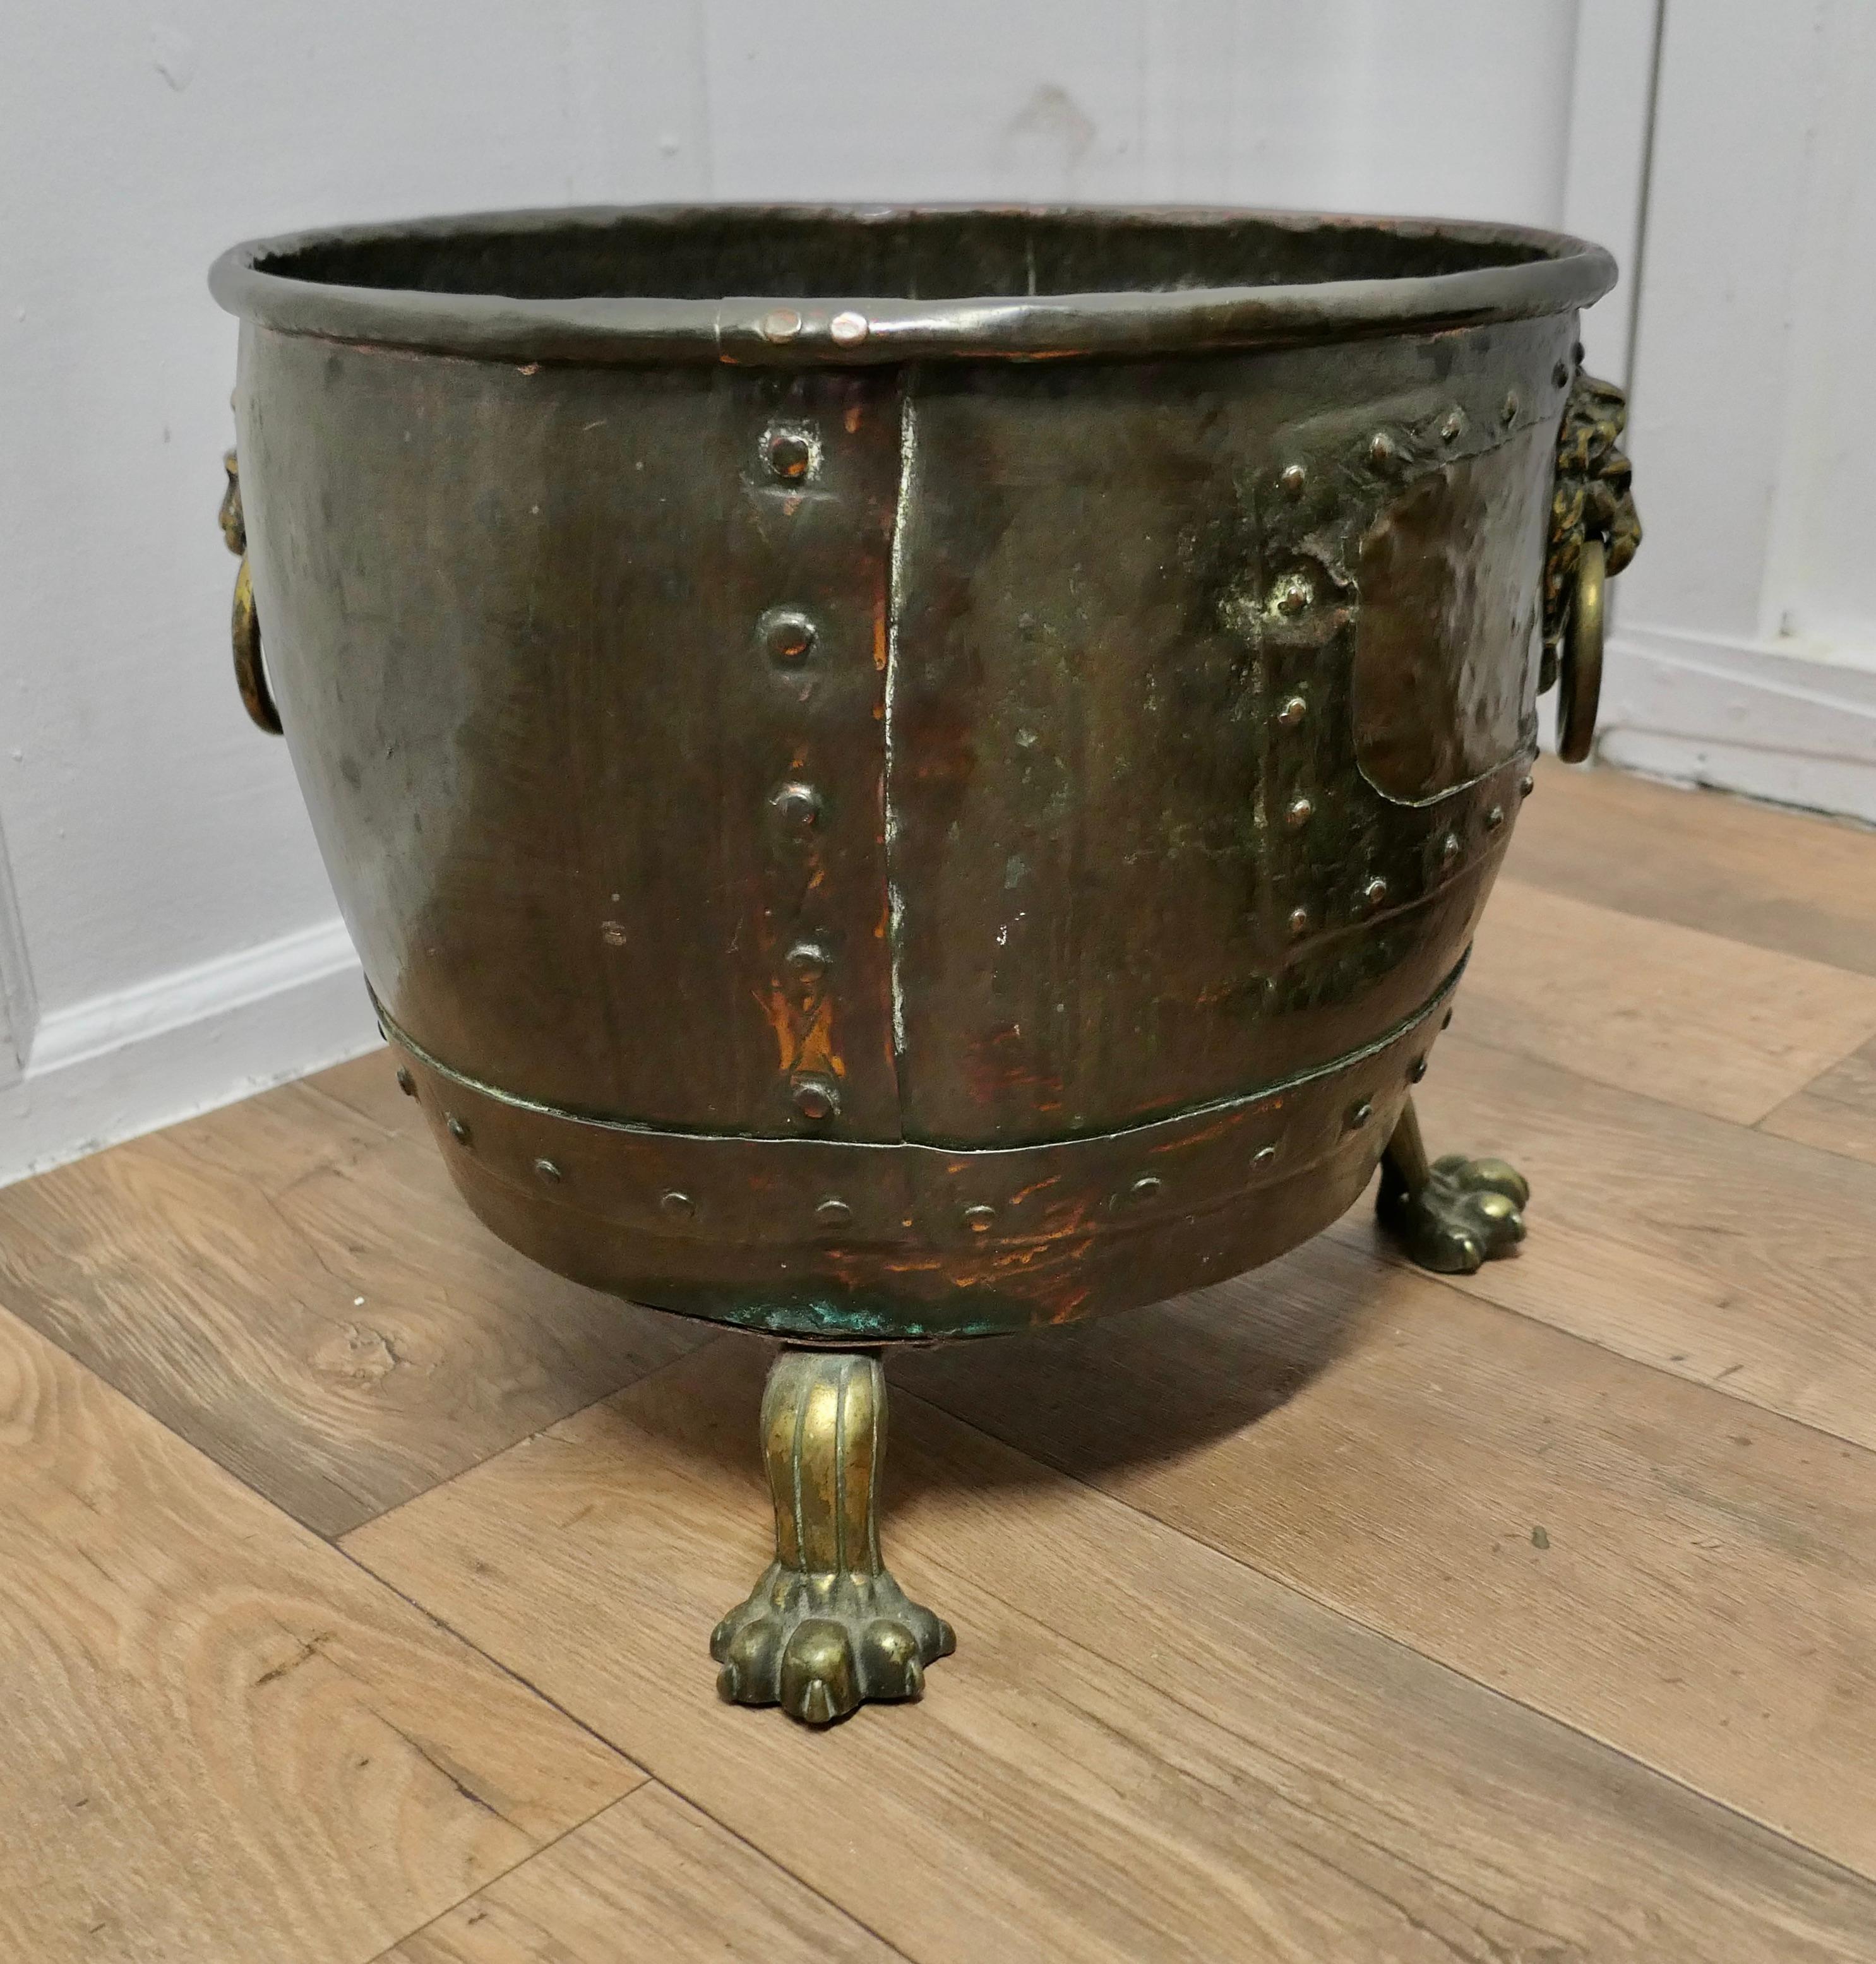 Gothic Revival Large Early 19th Century Copper Log Cauldron  This is a lovely looking Cauldron